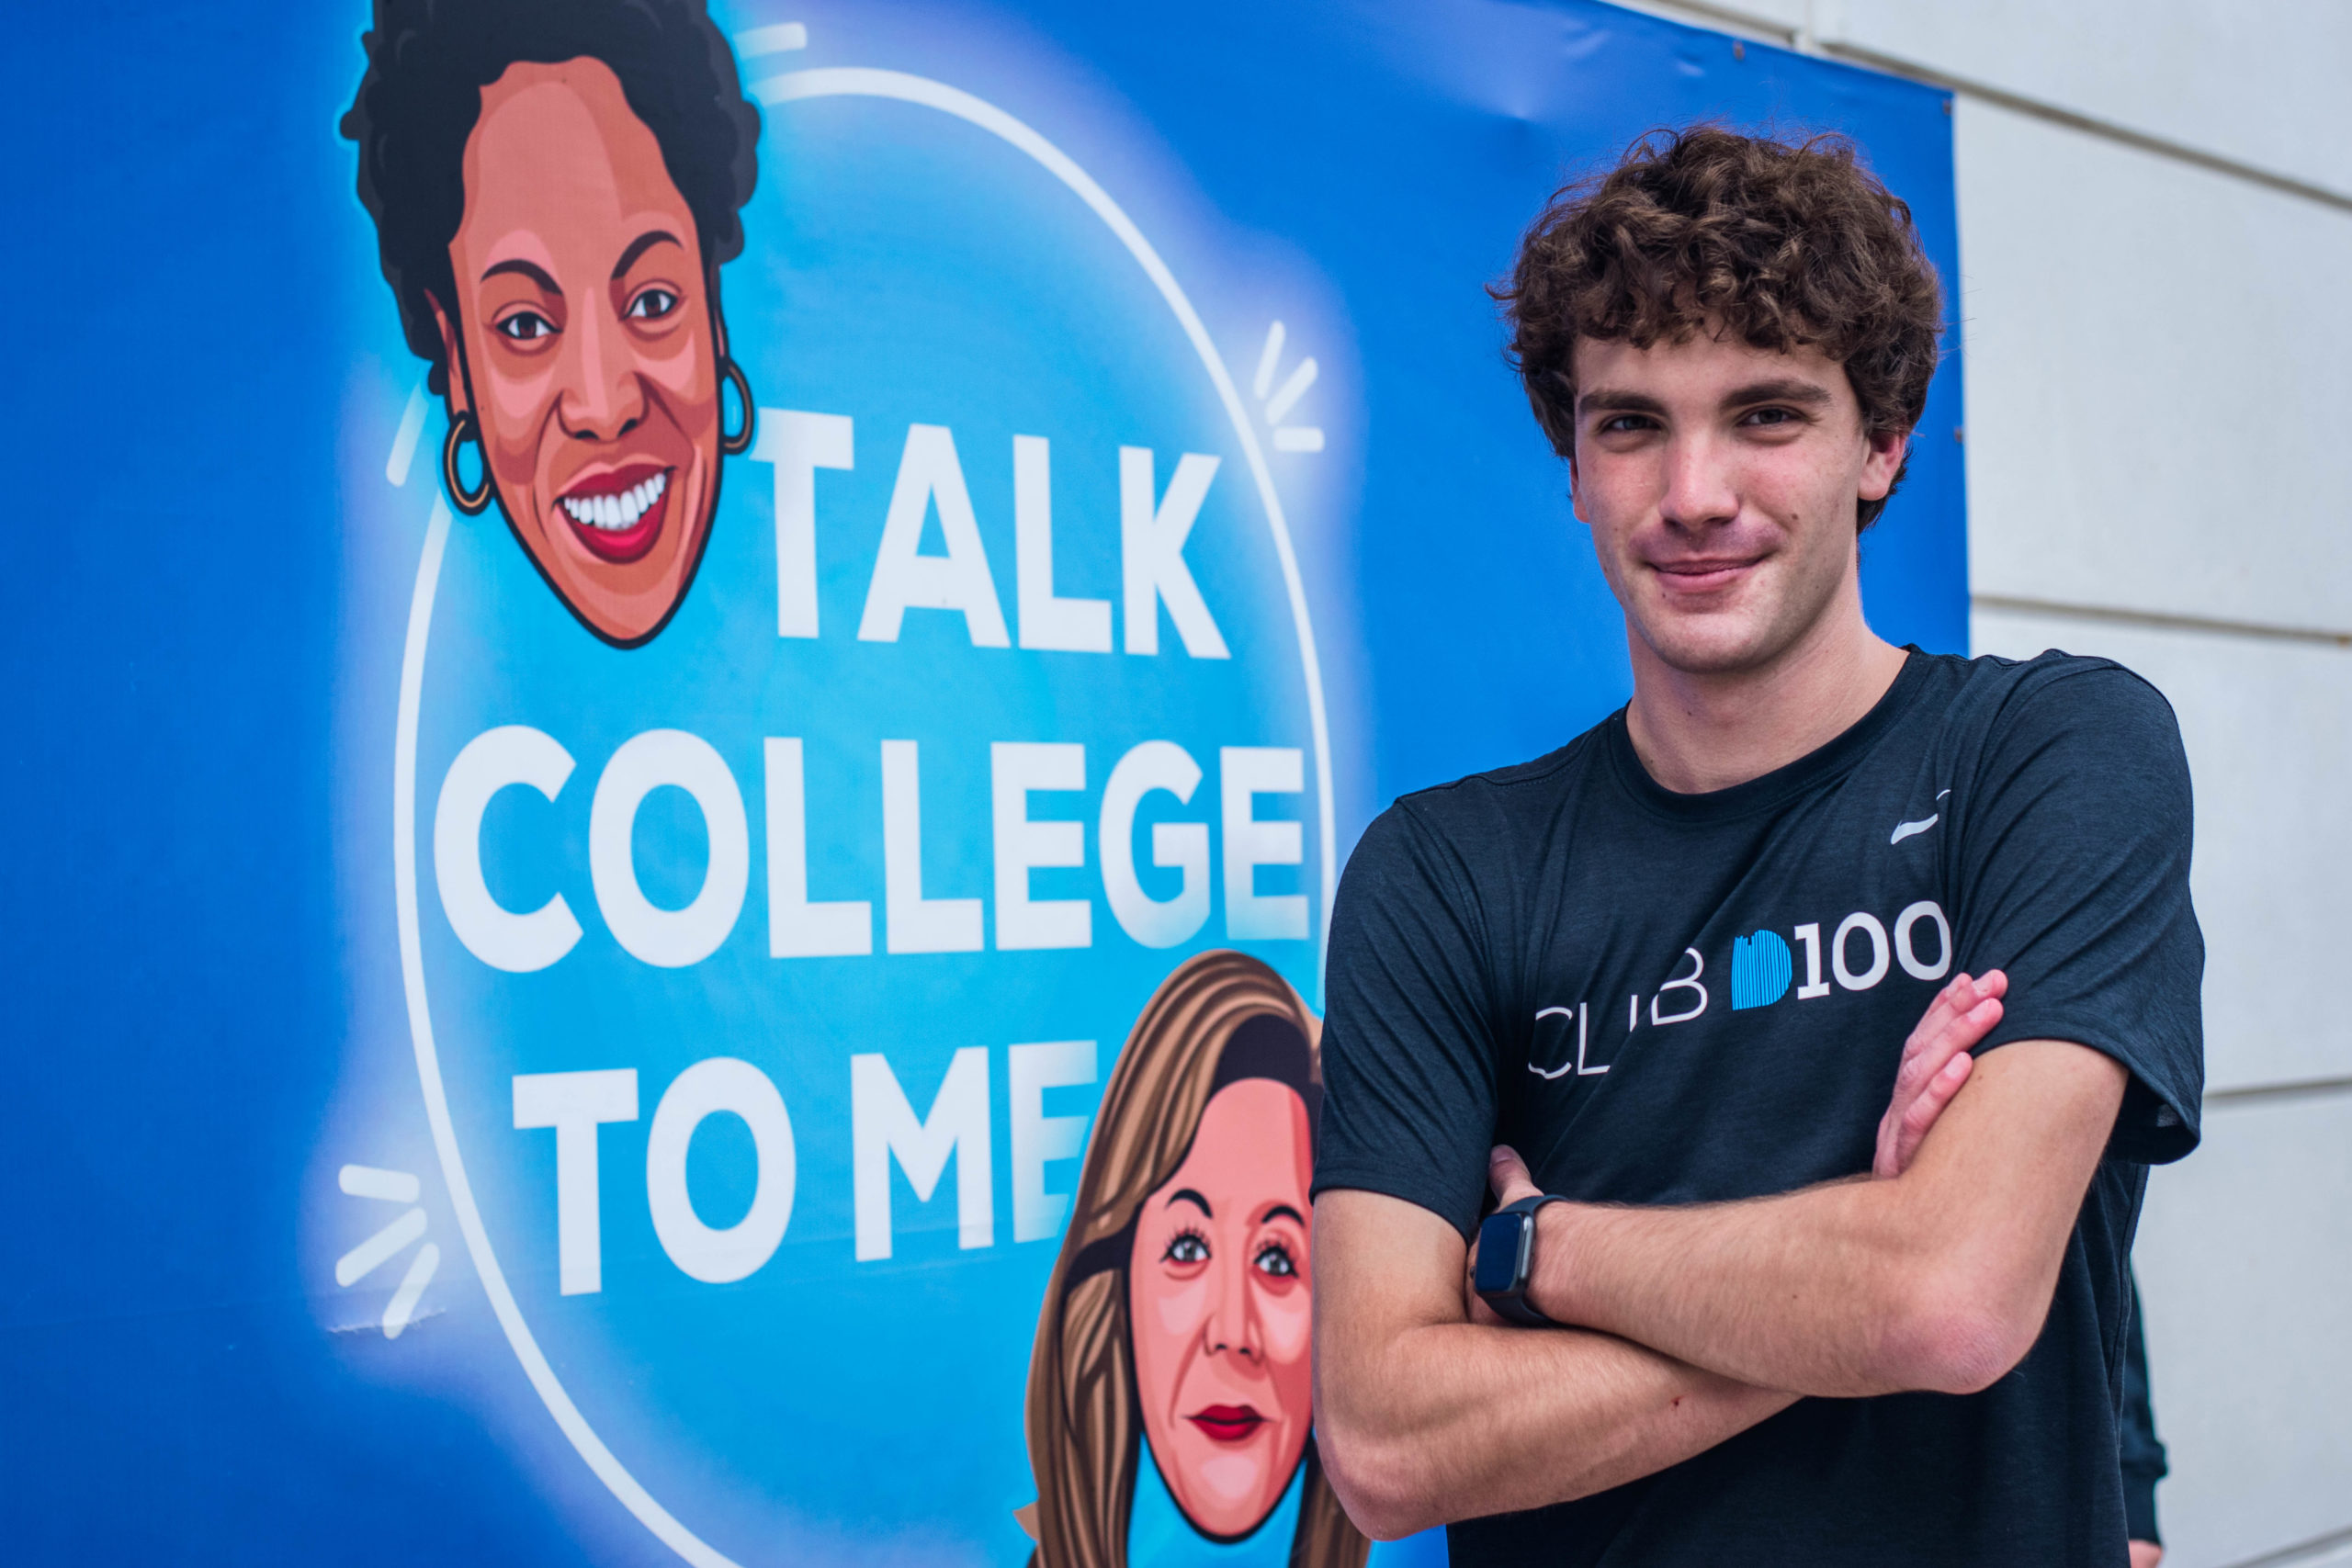 Dykan Carollo of D100 Radio poses in front of a Talk College To Me Podcast poster.